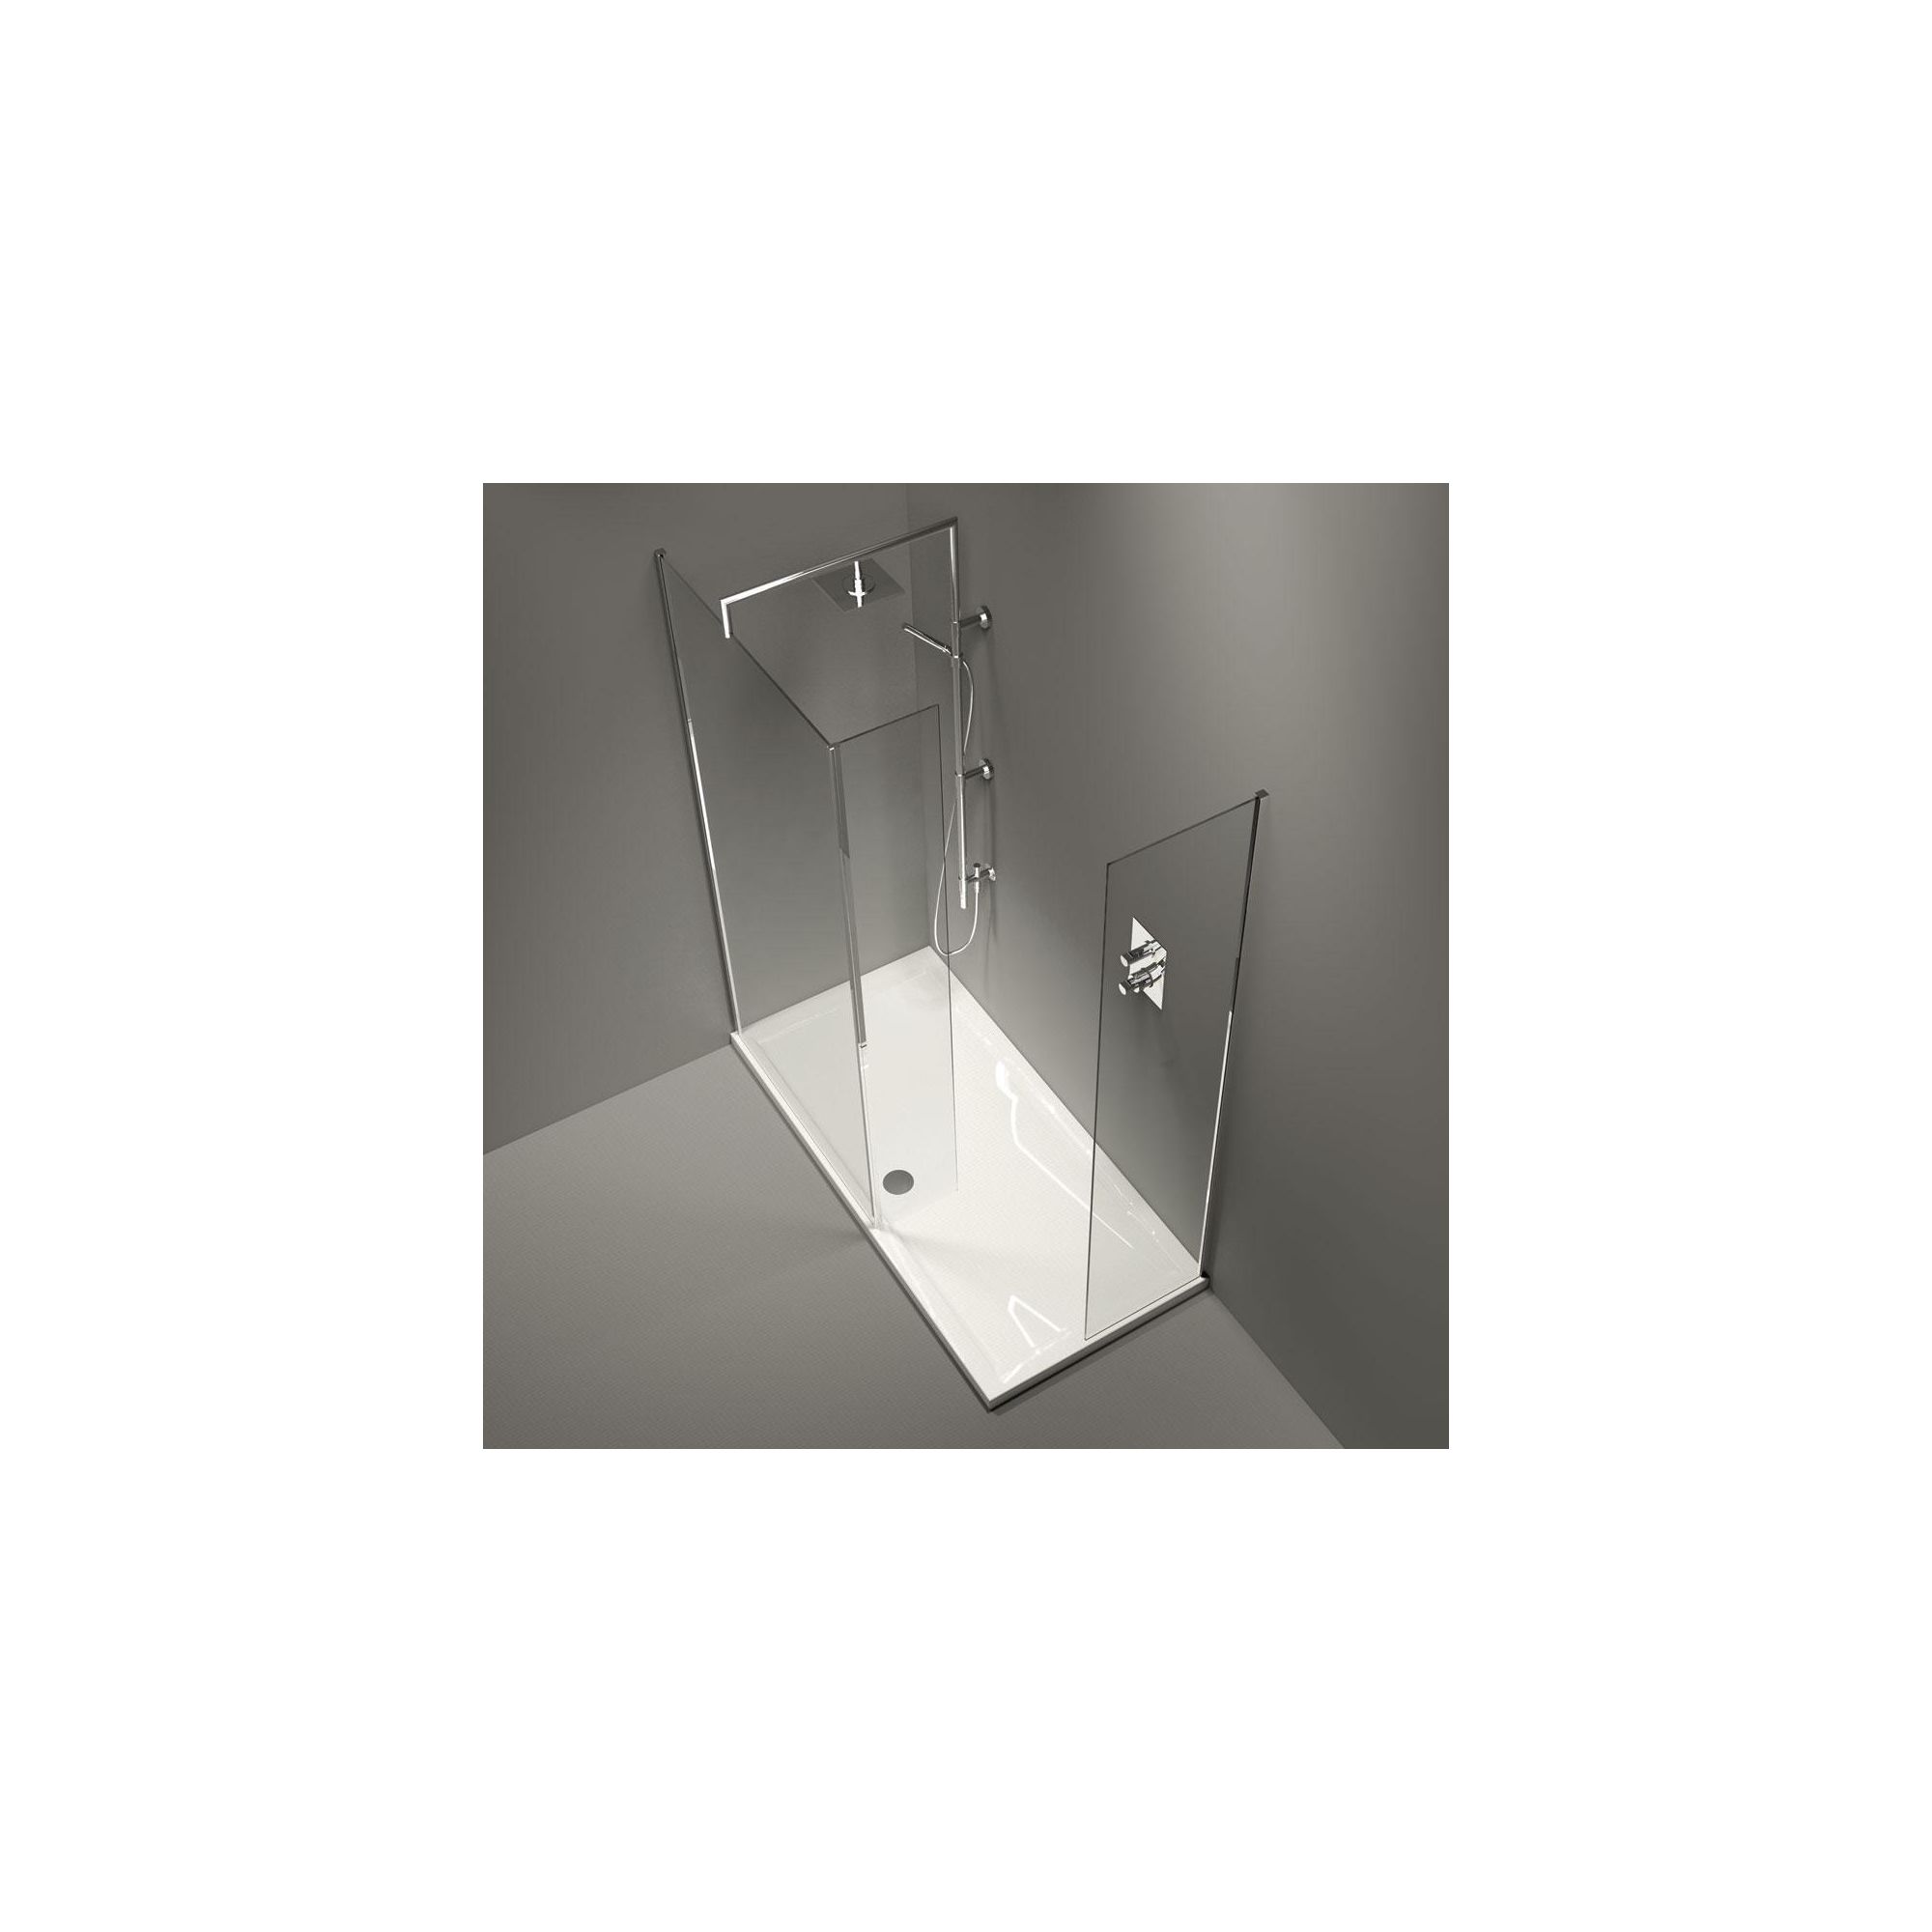 Merlyn Series 9 Cube Walk-In Shower Enclosure, 1500mm x 800mm, with Merlyte Tray, 8mm Glass at Tesco Direct